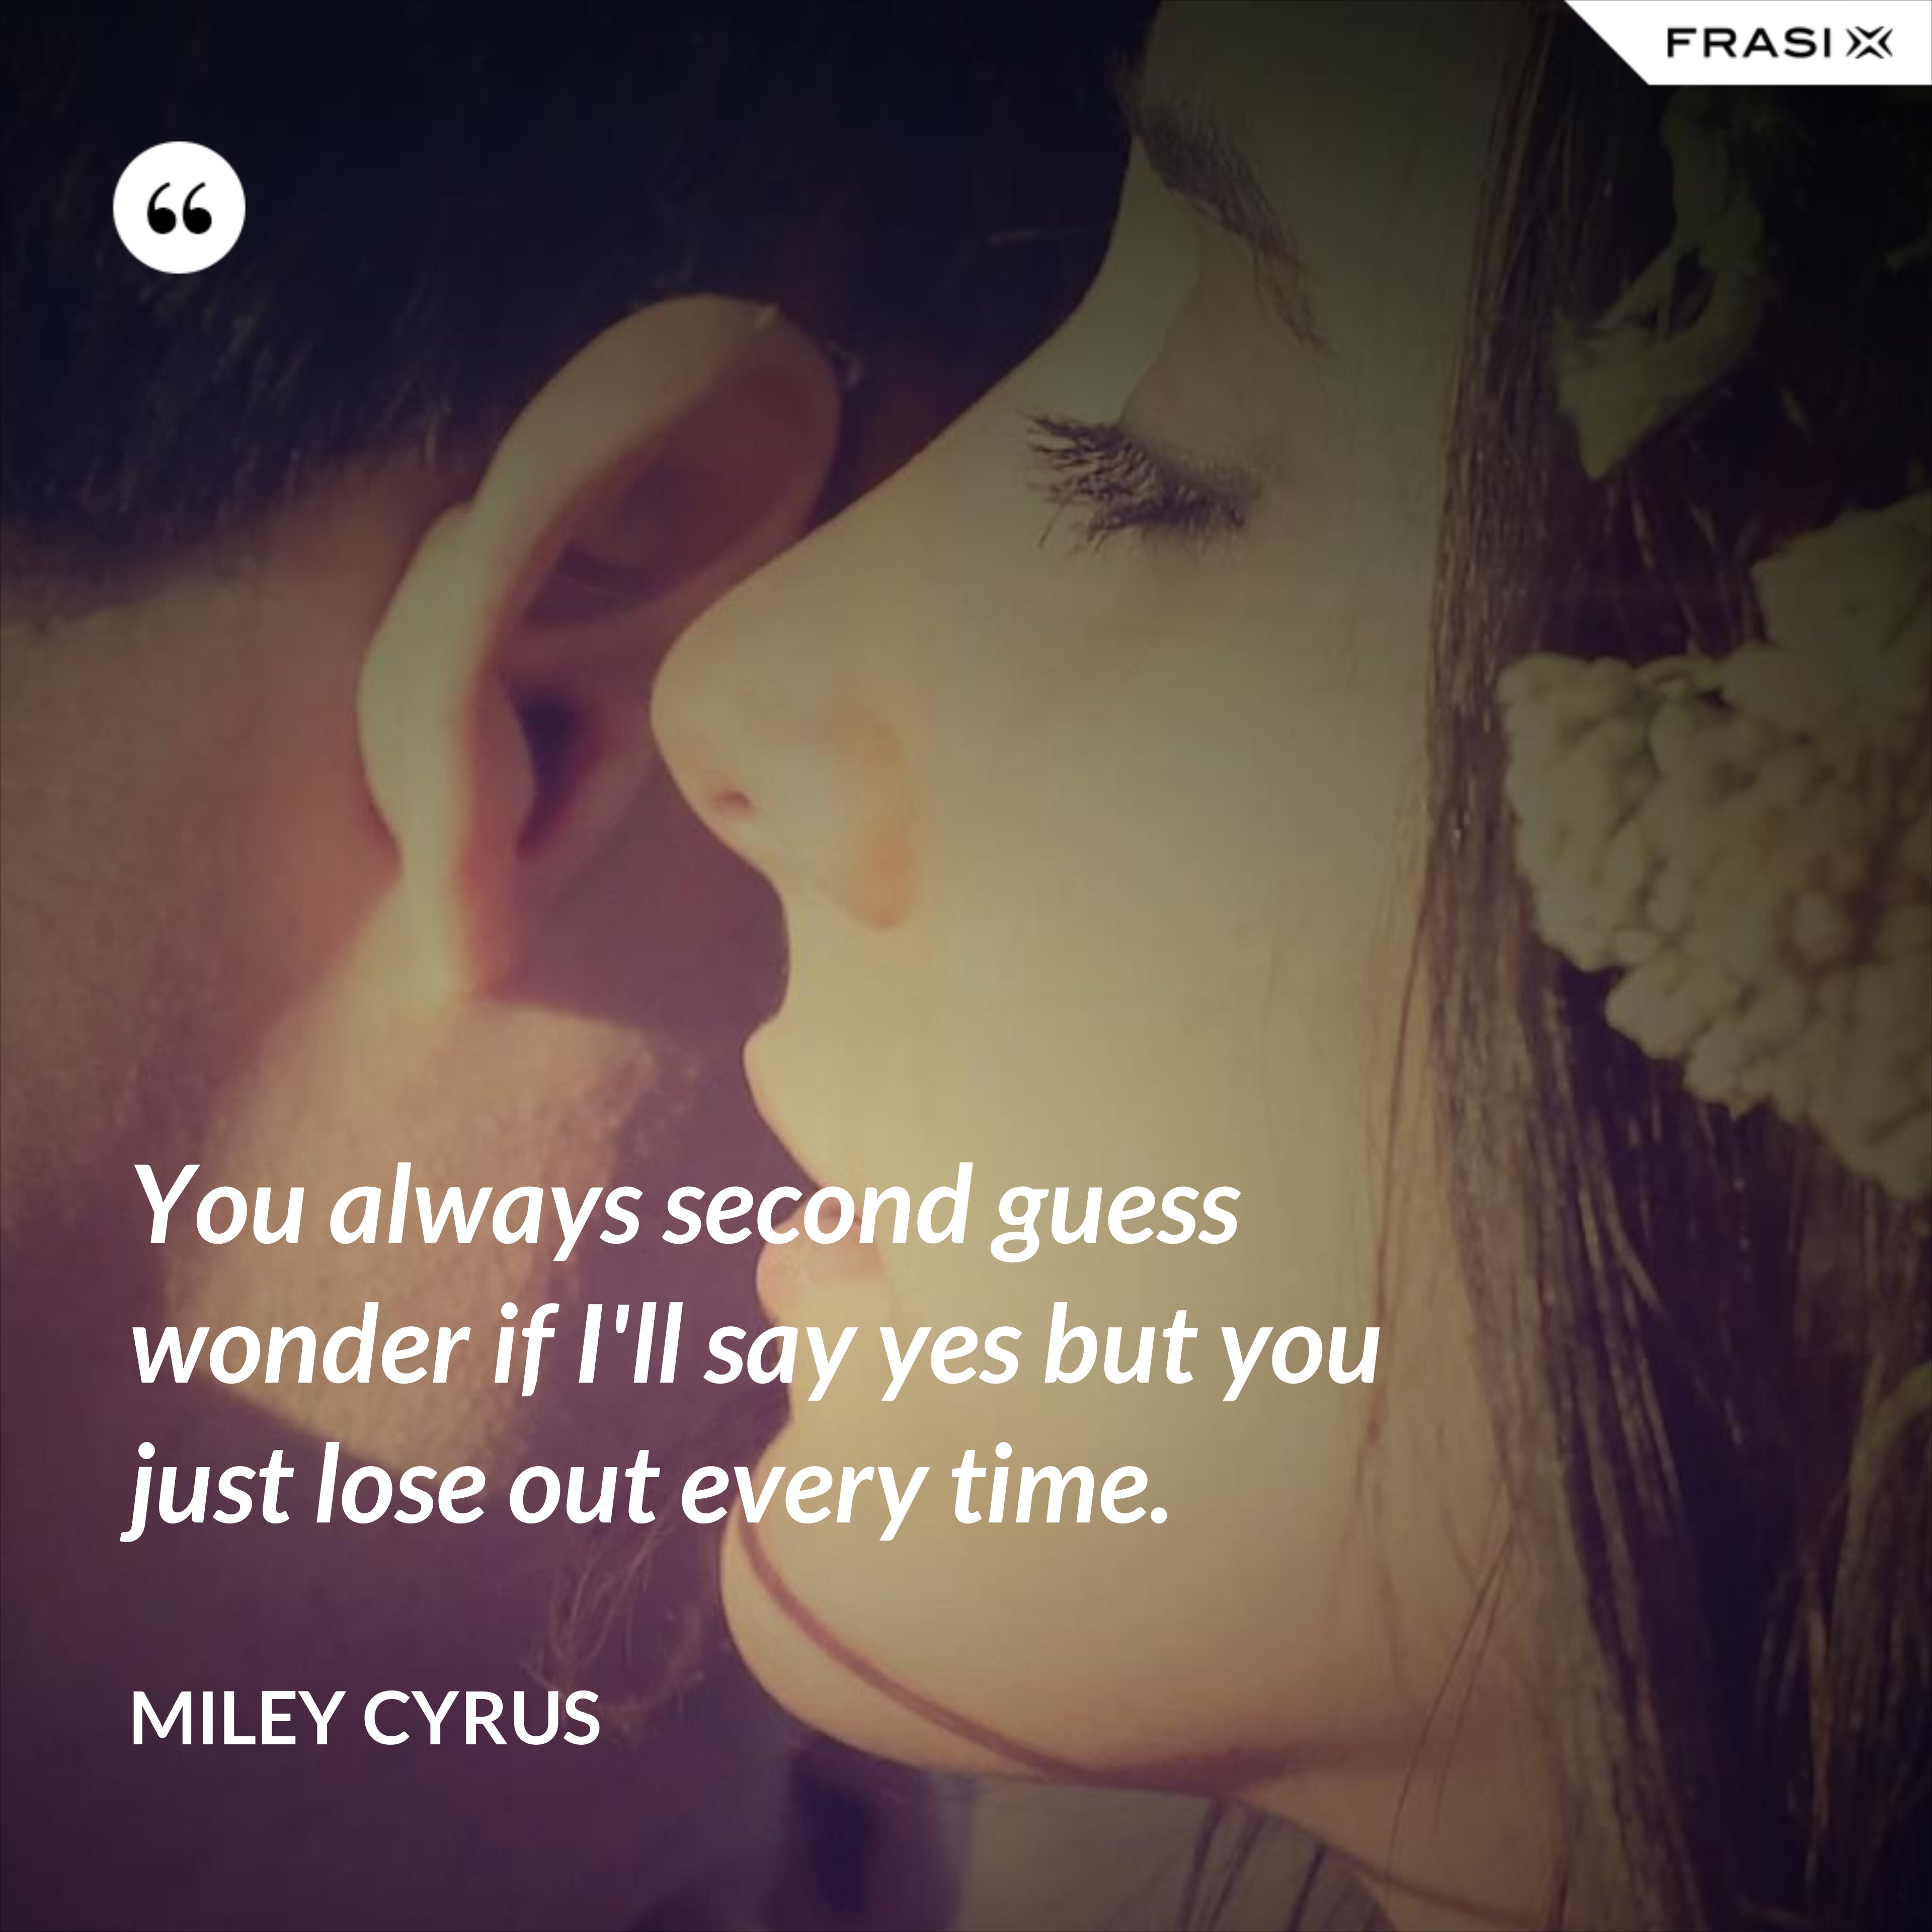 You always second guess wonder if I'll say yes but you just lose out every time. - Miley Cyrus